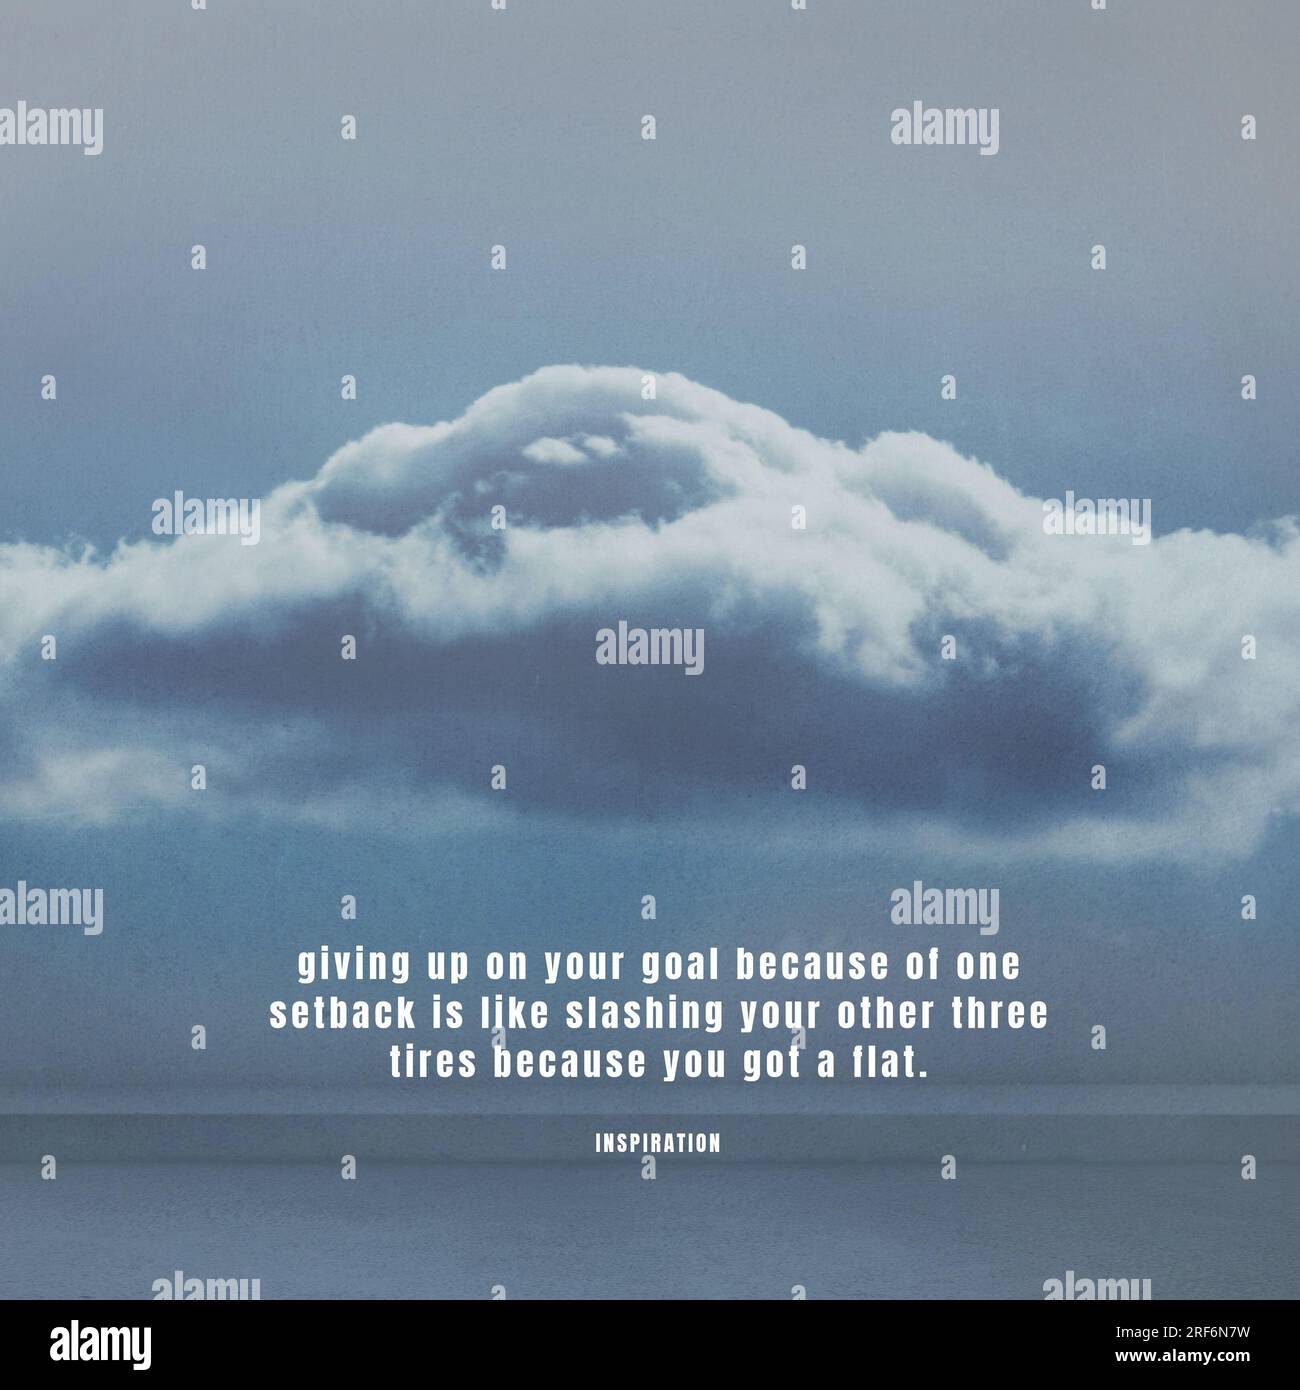 Composition of inspiration quote text over clouds on blue sky background Stock Photo